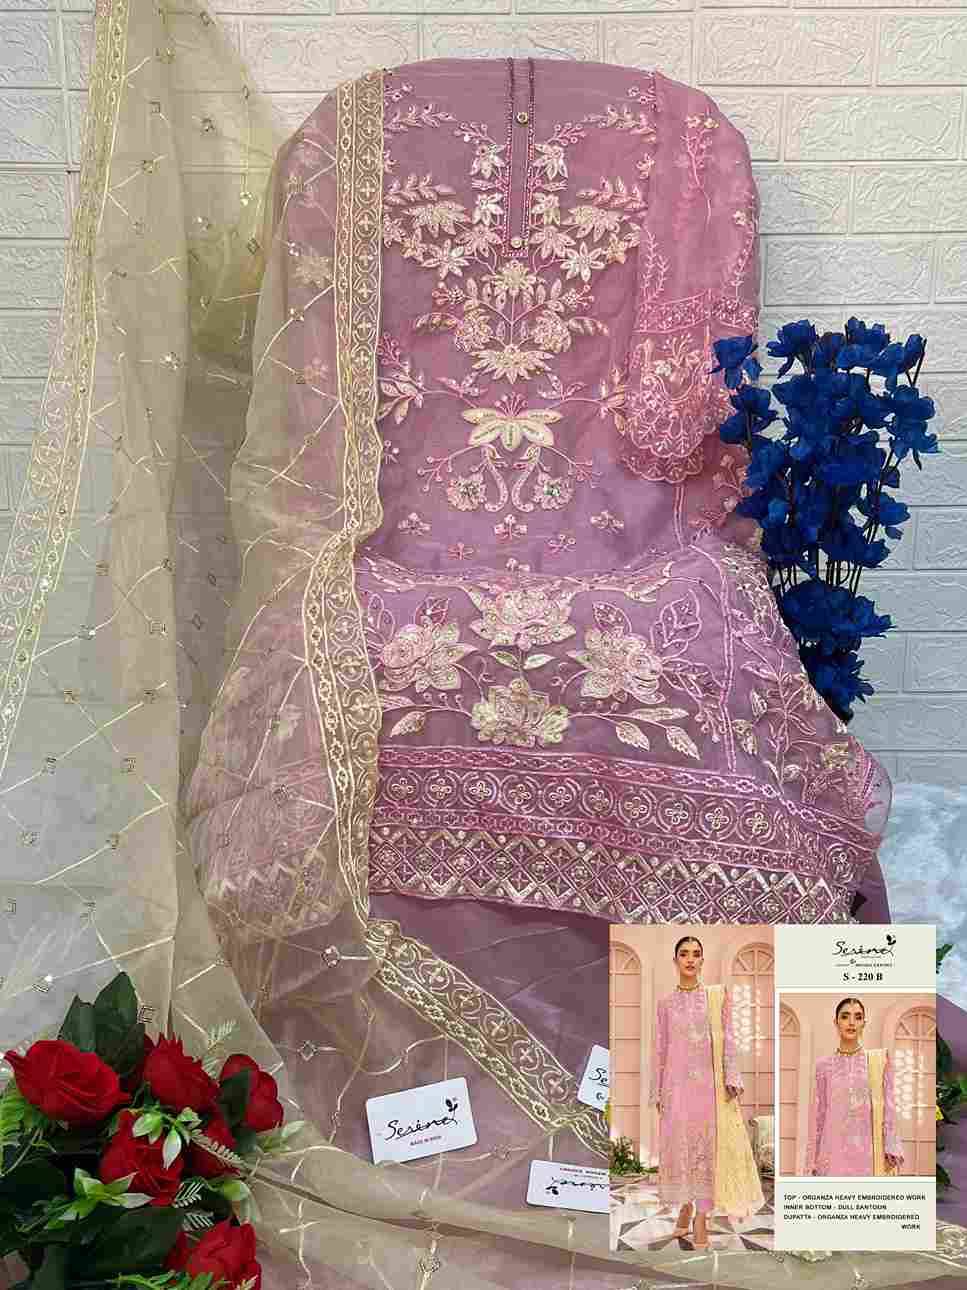 Serene Hit Design S-220 Colours By Serene S-220-A To S-220-D Series Designer Pakistani Suits Beautiful Fancy Colorful Stylish Party Wear & Occasional Wear Organza Embroidered Dresses At Wholesale Price